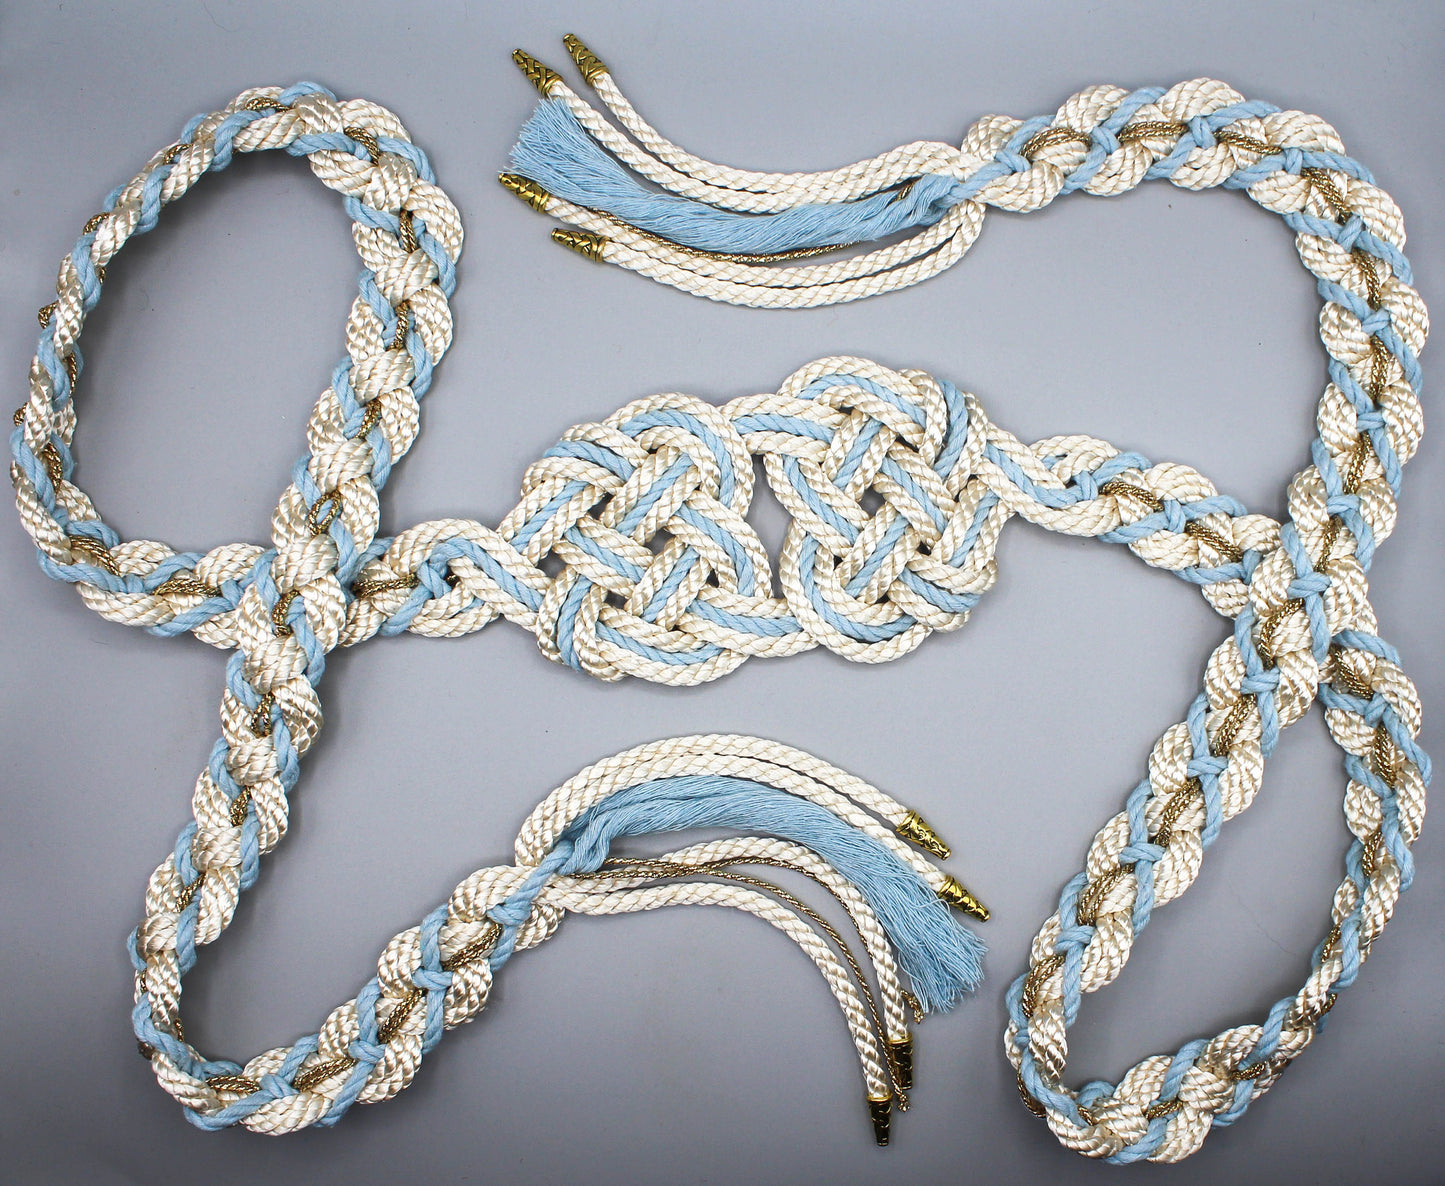 Hearts Entwined - Light Blue and Gold